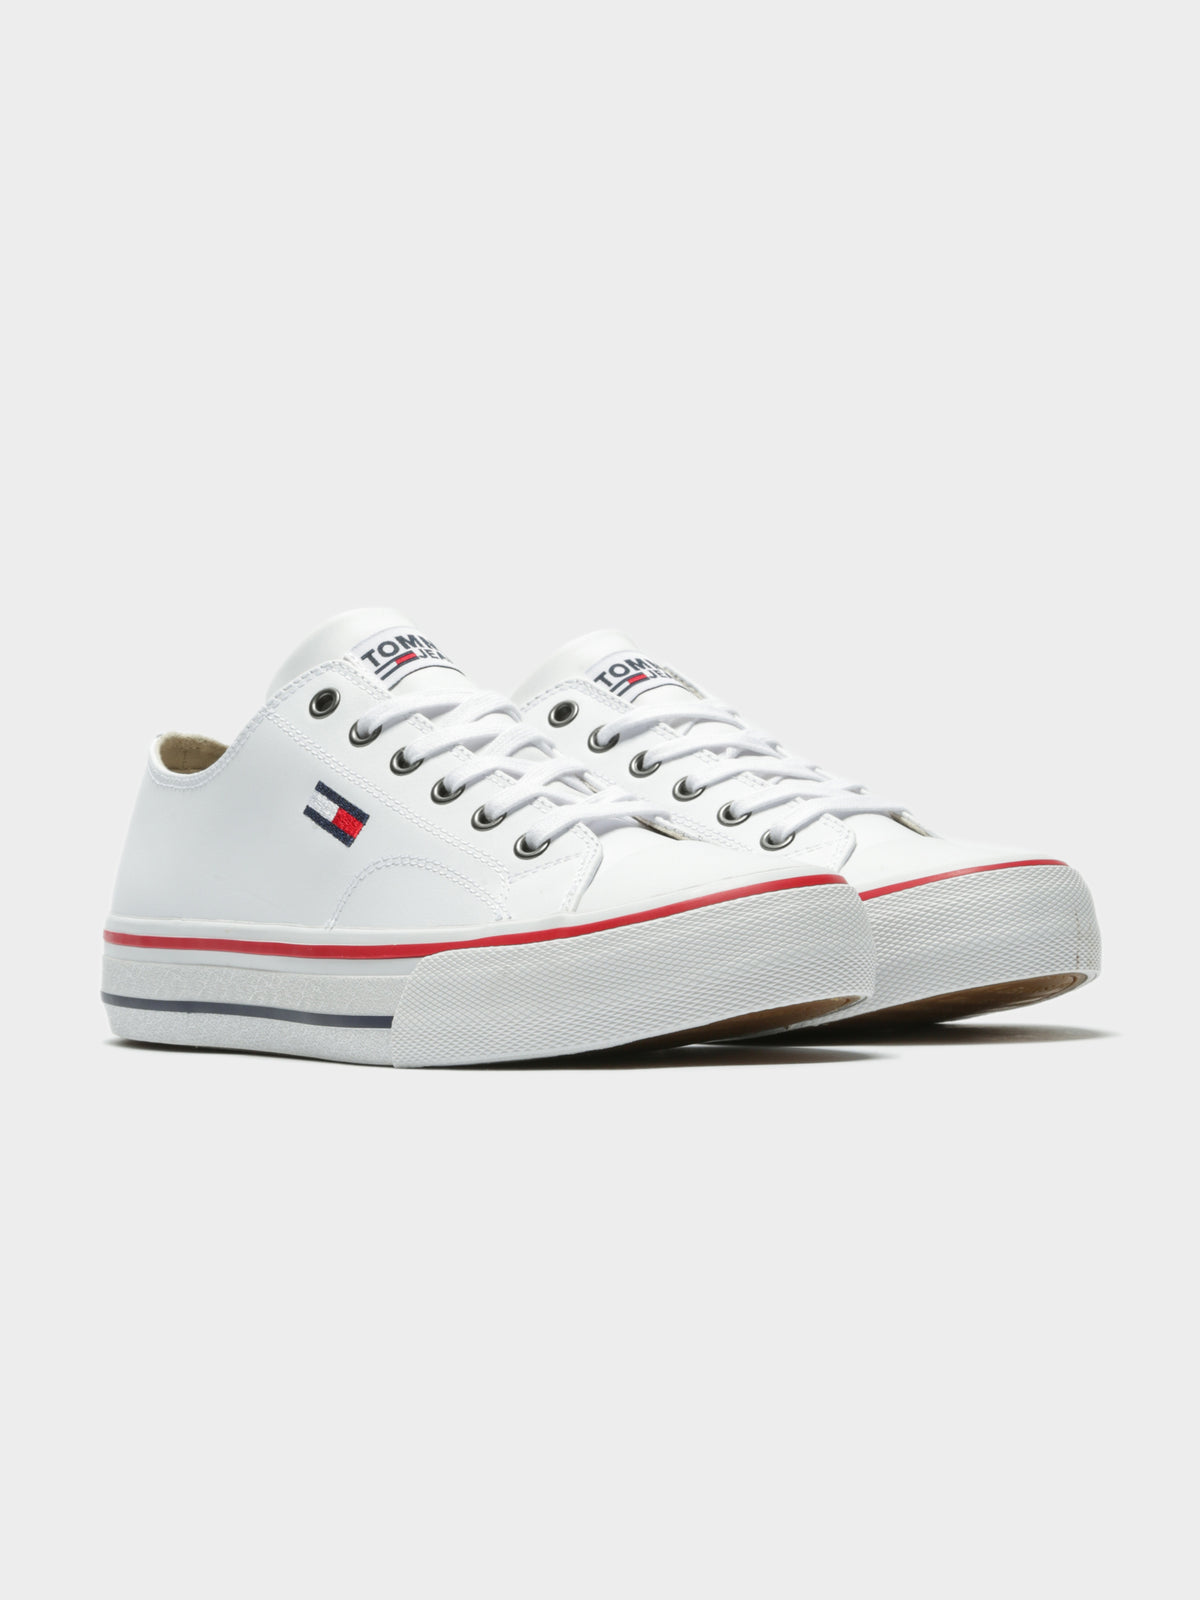 Unisex Leather City Sneakers in White